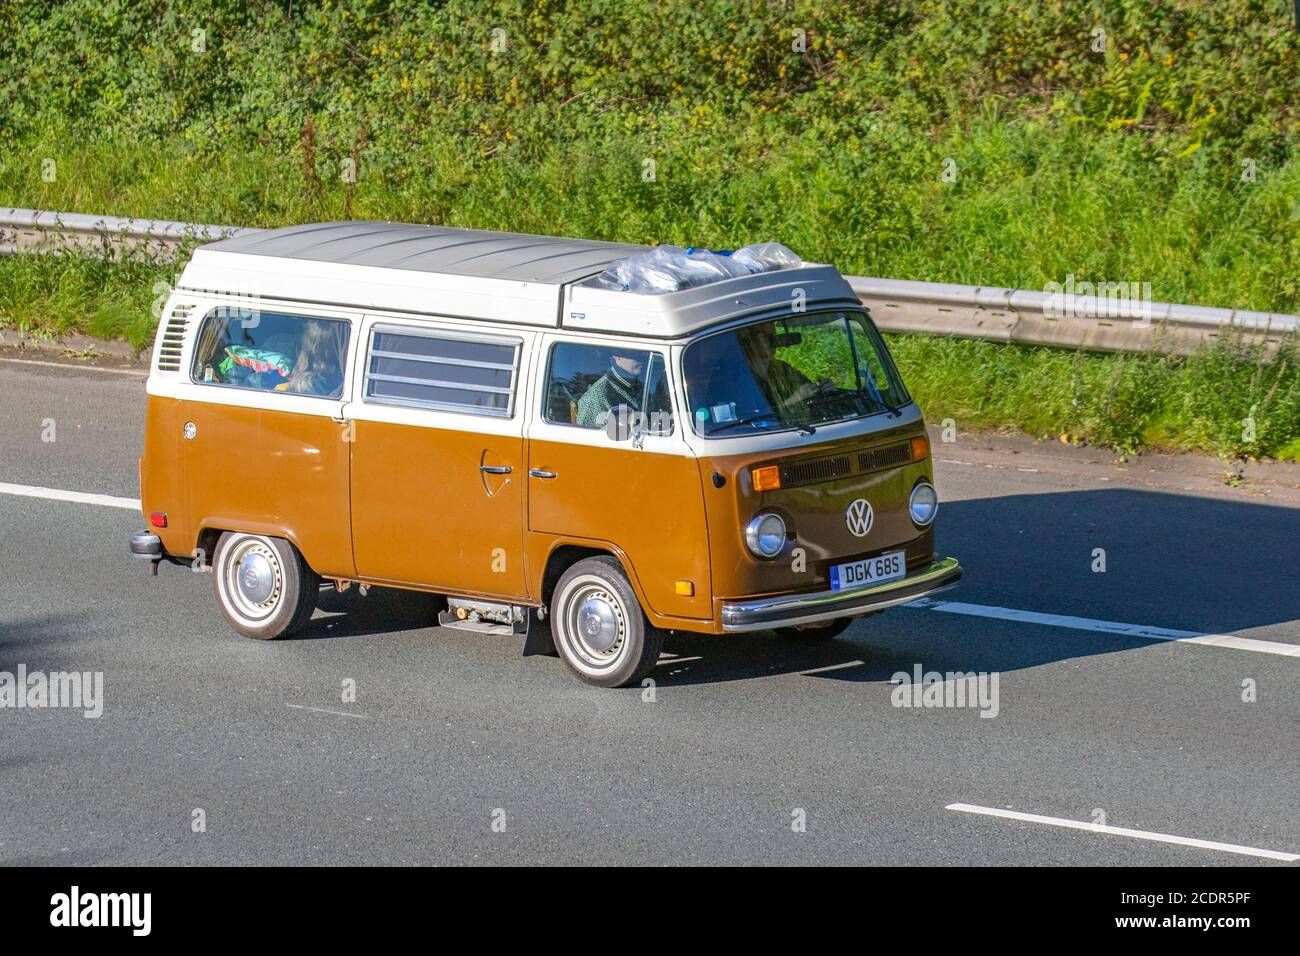 1978 70s seventies brown white VW Volkswagen Caravans and Motorhomes, campervans on Britain's roads, RV leisure vehicle, family holidays, caravanette vacations, Touring caravan holiday, 70s van conversions, Vanagon autohome, life on the road, bay window dormobile on the M6 motorway, UK Stock Photo